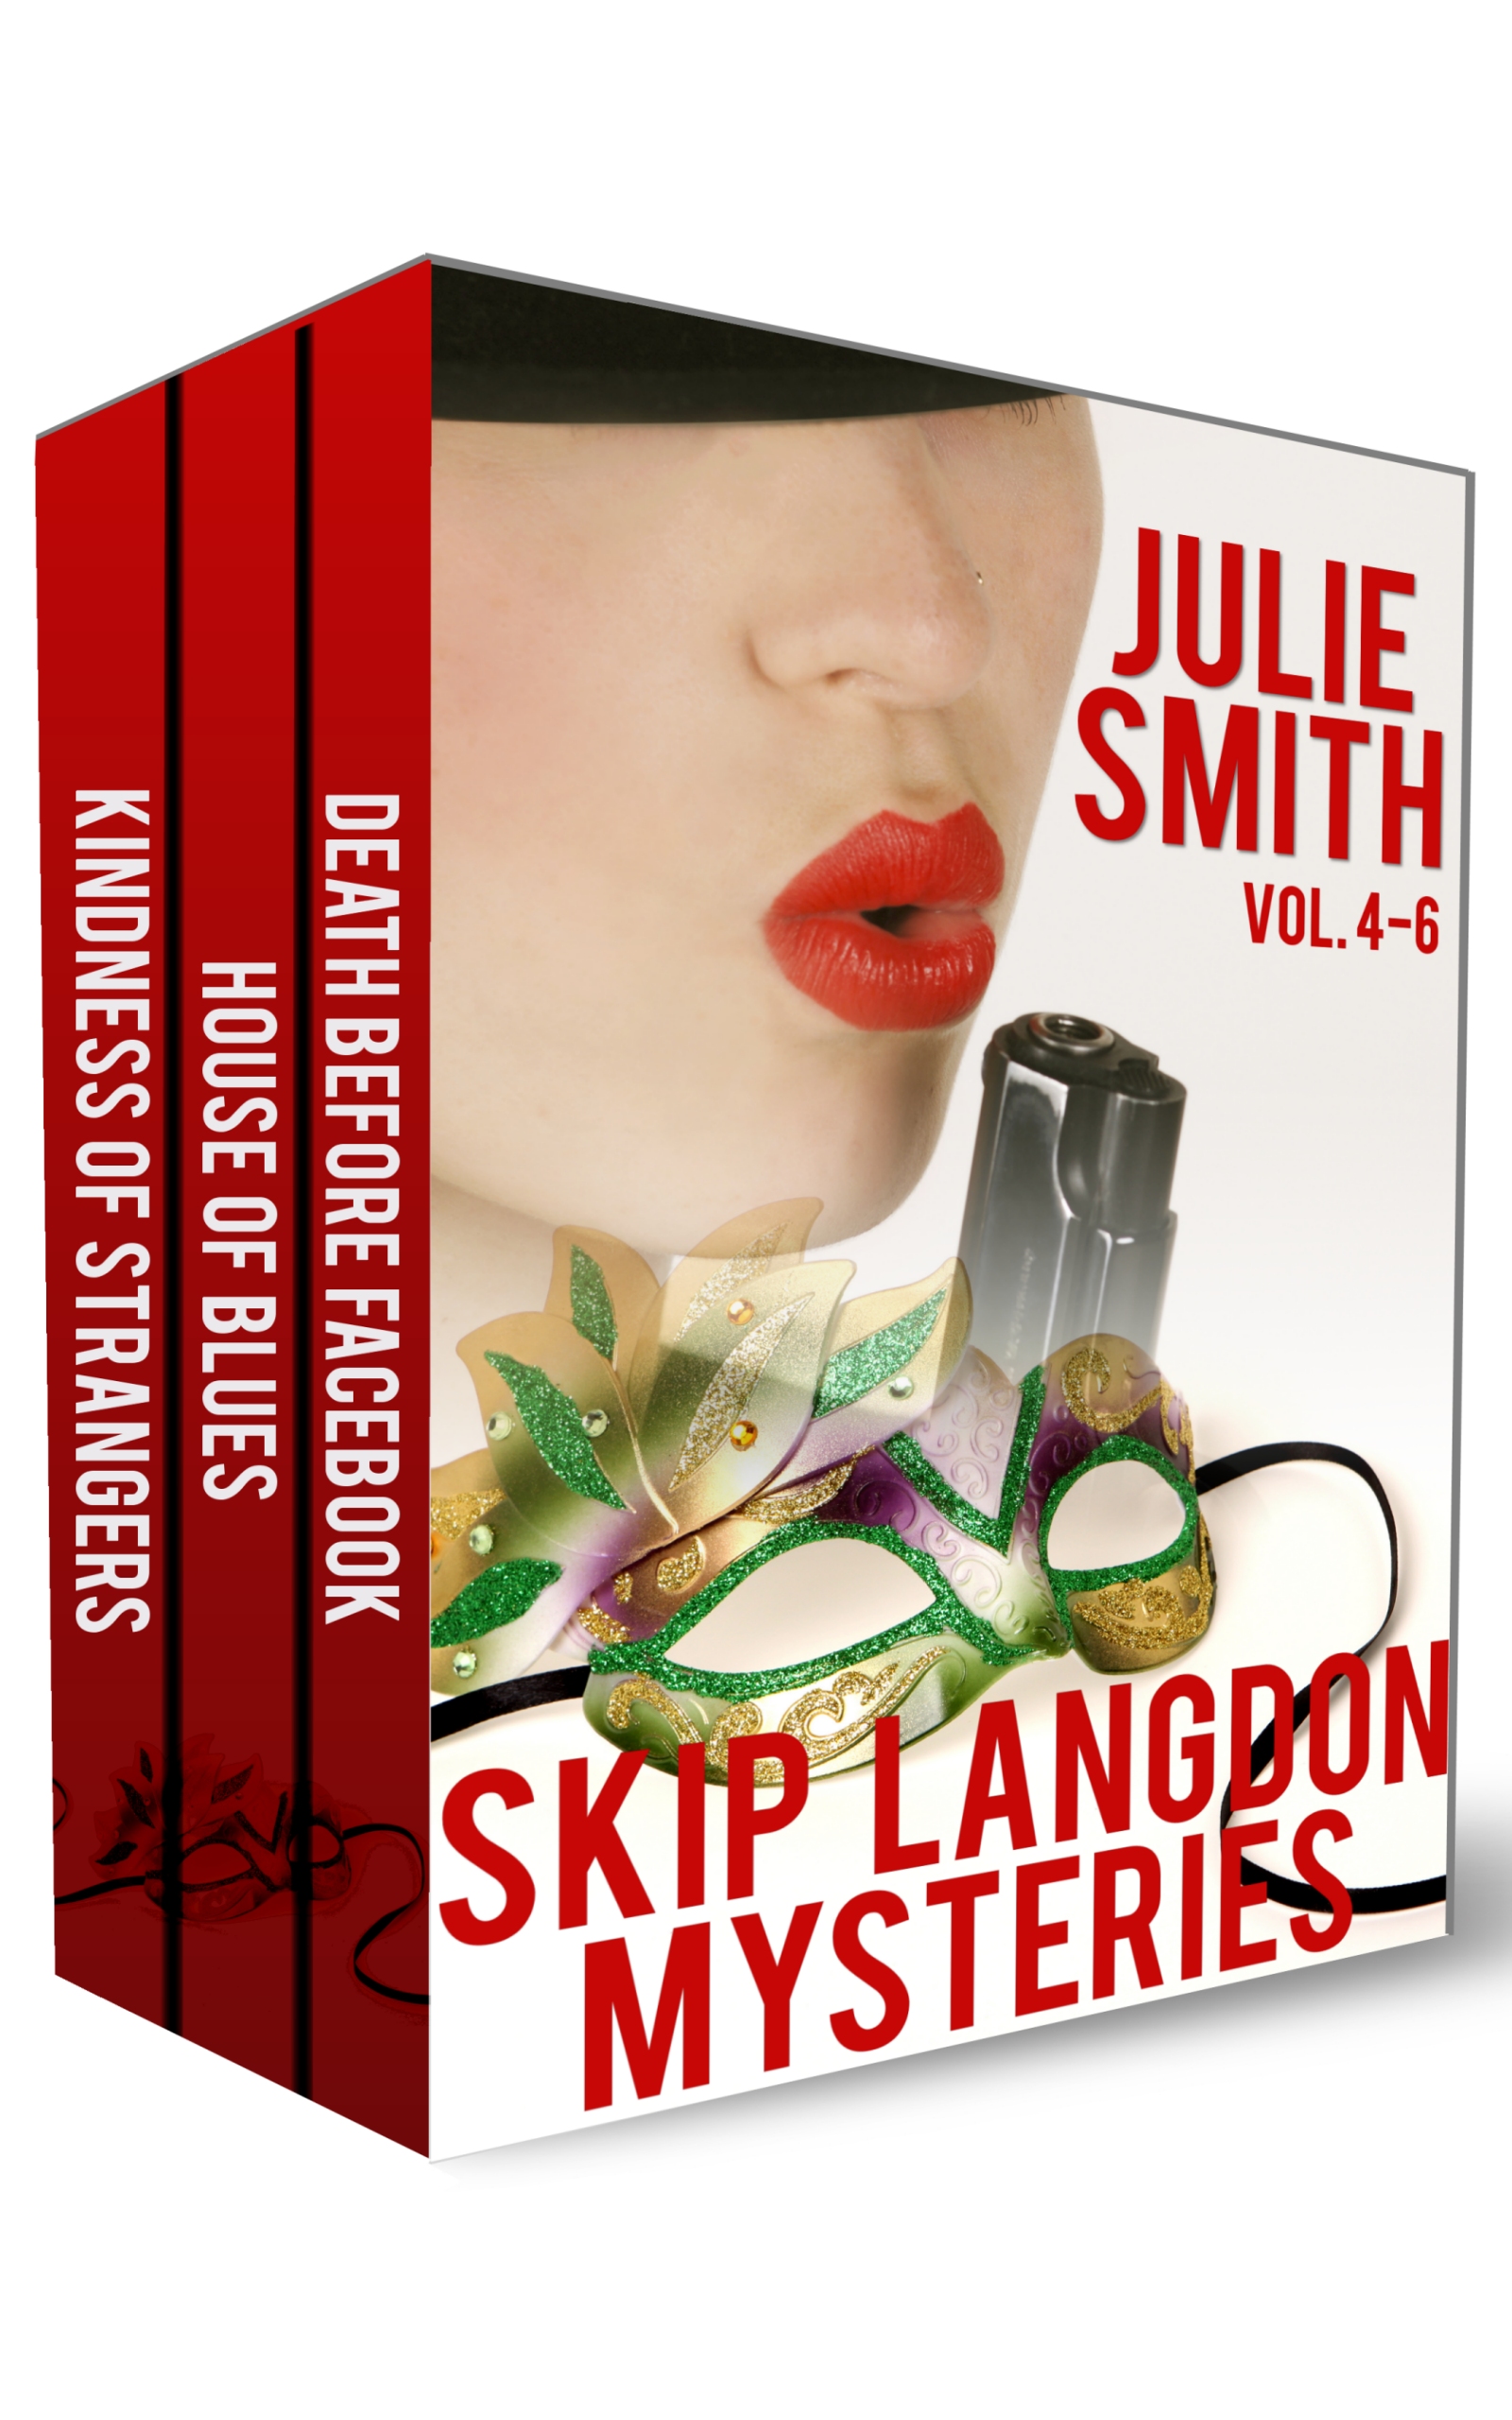 Skip Langdon Mysteries Vol 4-6: The Skip Langdon Mystery Anthologies by Julie Smith Author